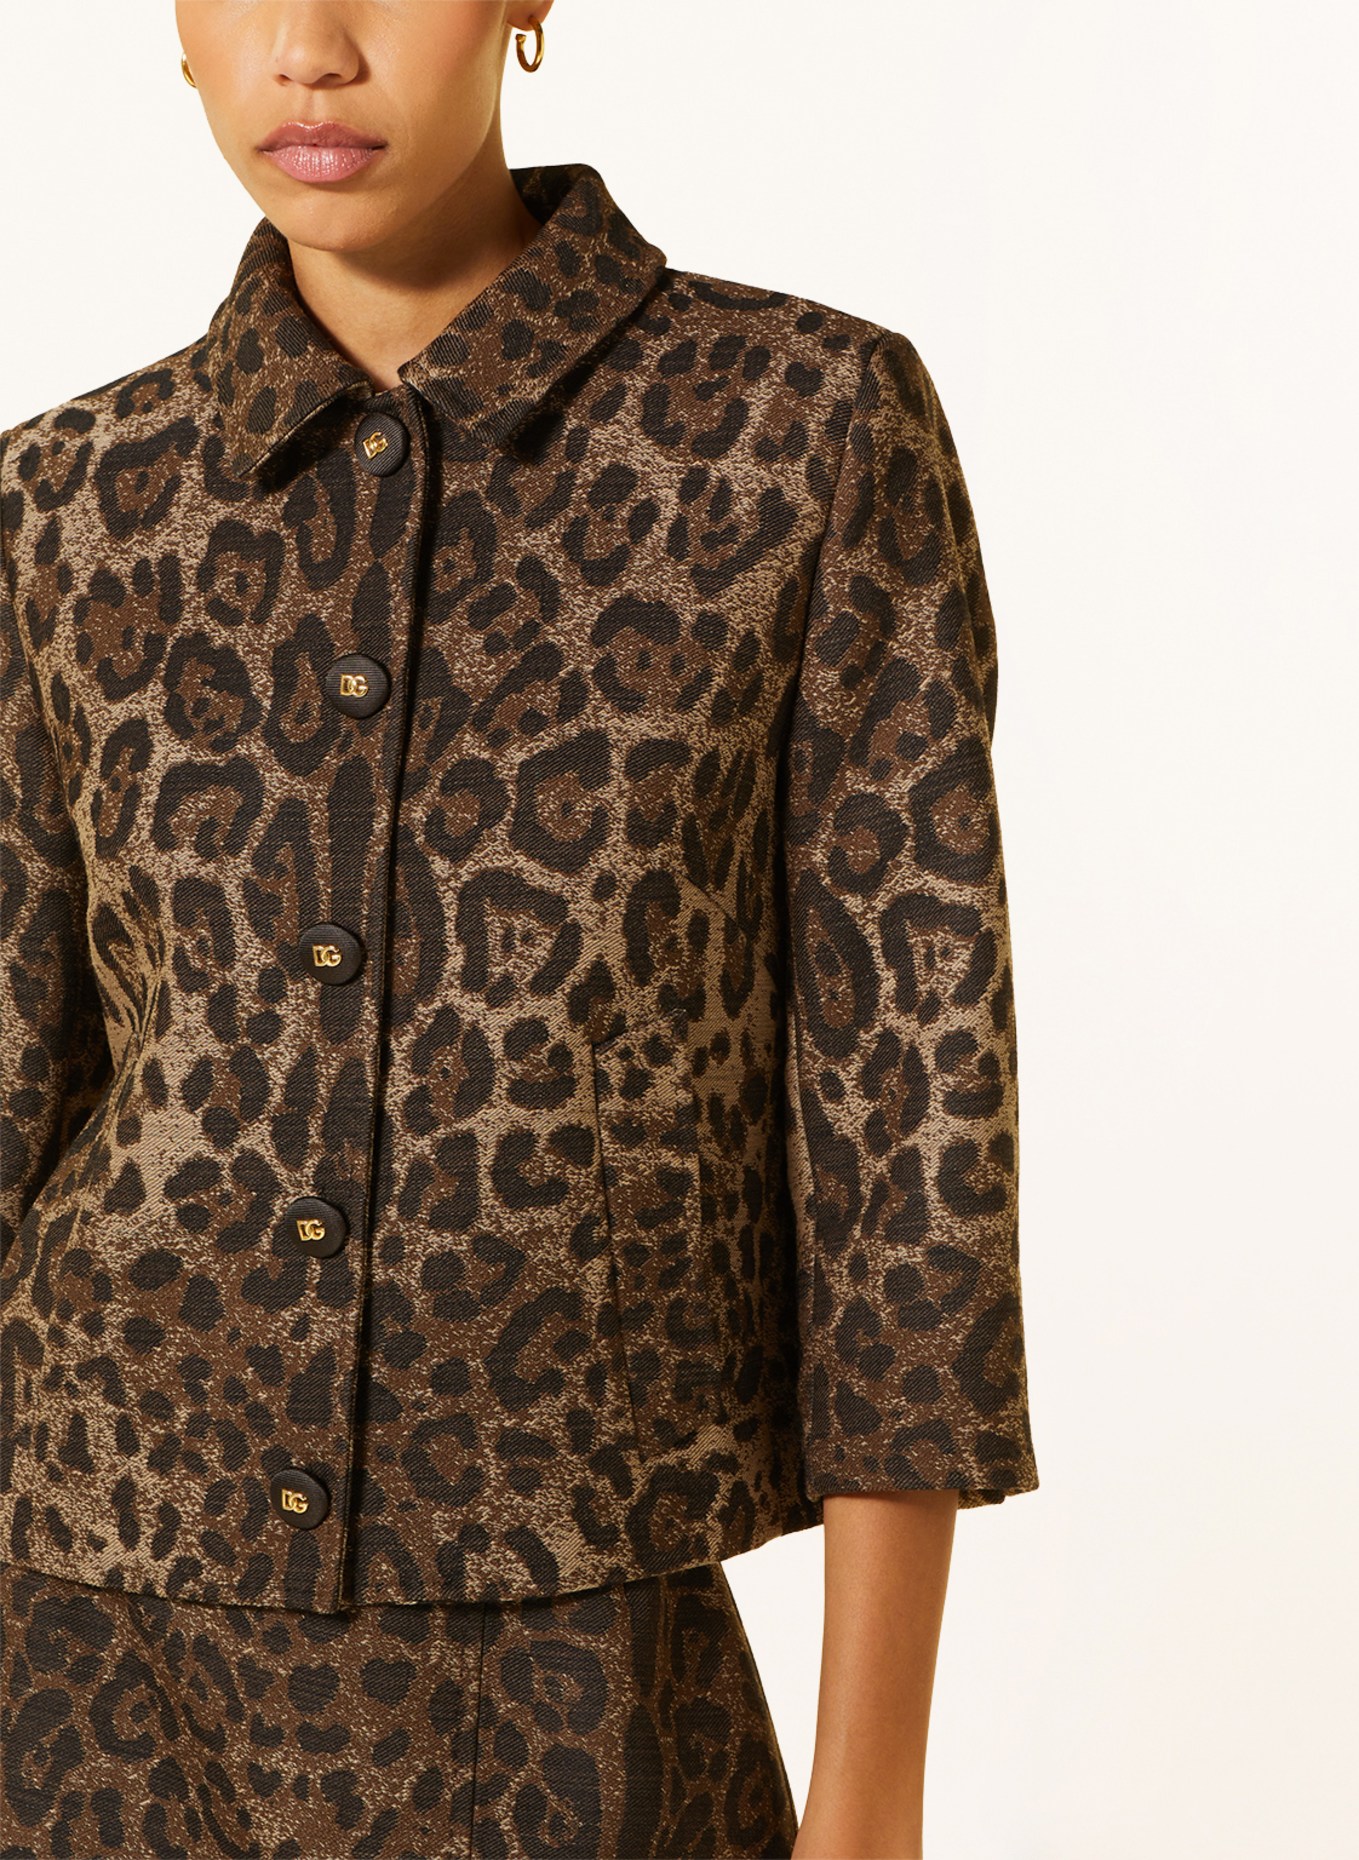 DOLCE & GABBANA Jacquard jacket with 3/4 sleeves, Color: BROWN/ DARK BROWN/ LIGHT BROWN (Image 4)